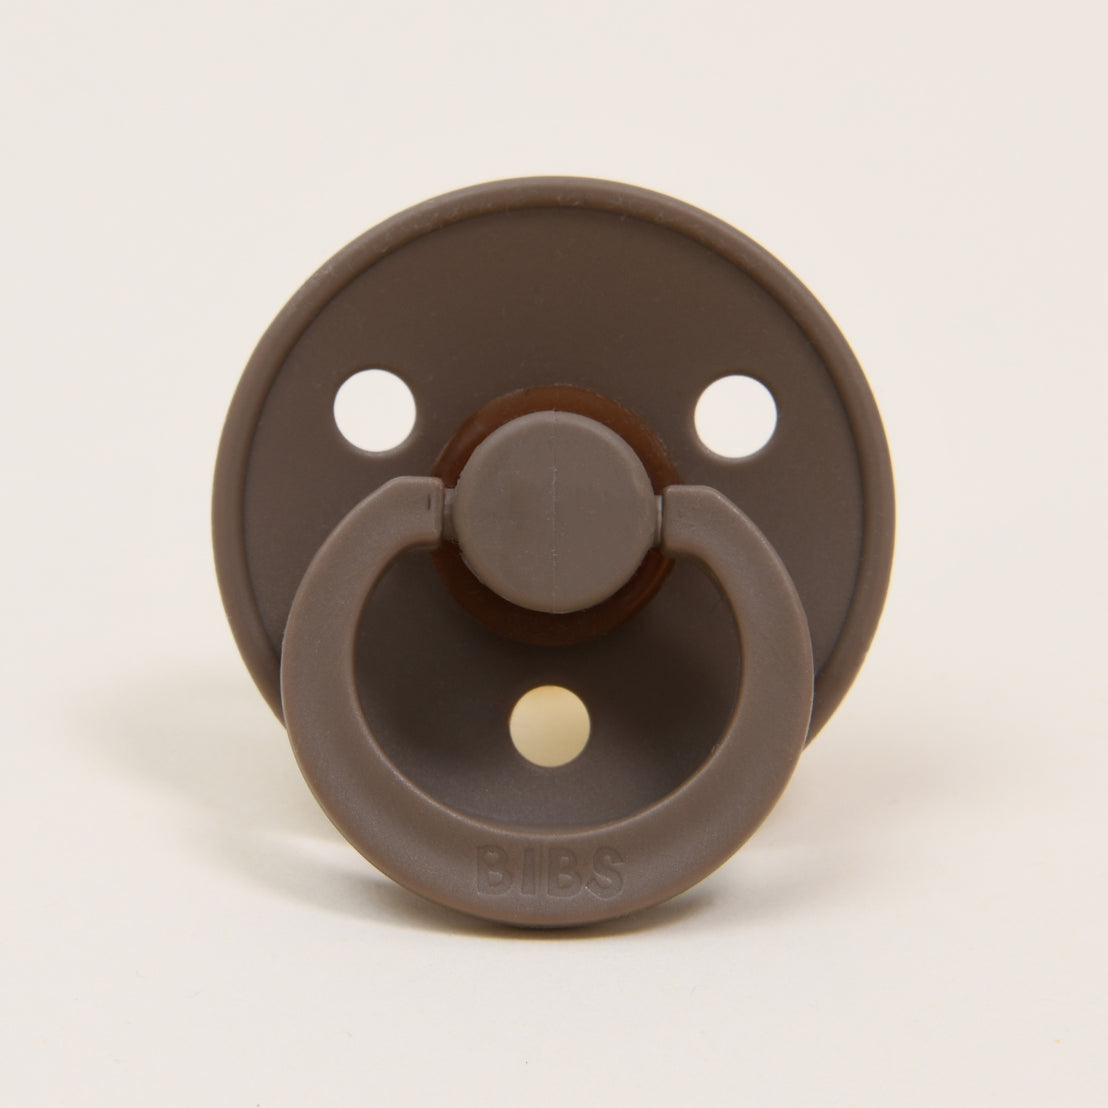 A Mason Pacifier in Dark Oak with a round shield and two ventilation holes, featuring a vintage heirloom design with the brand name "bibs" inscribed at the center front.